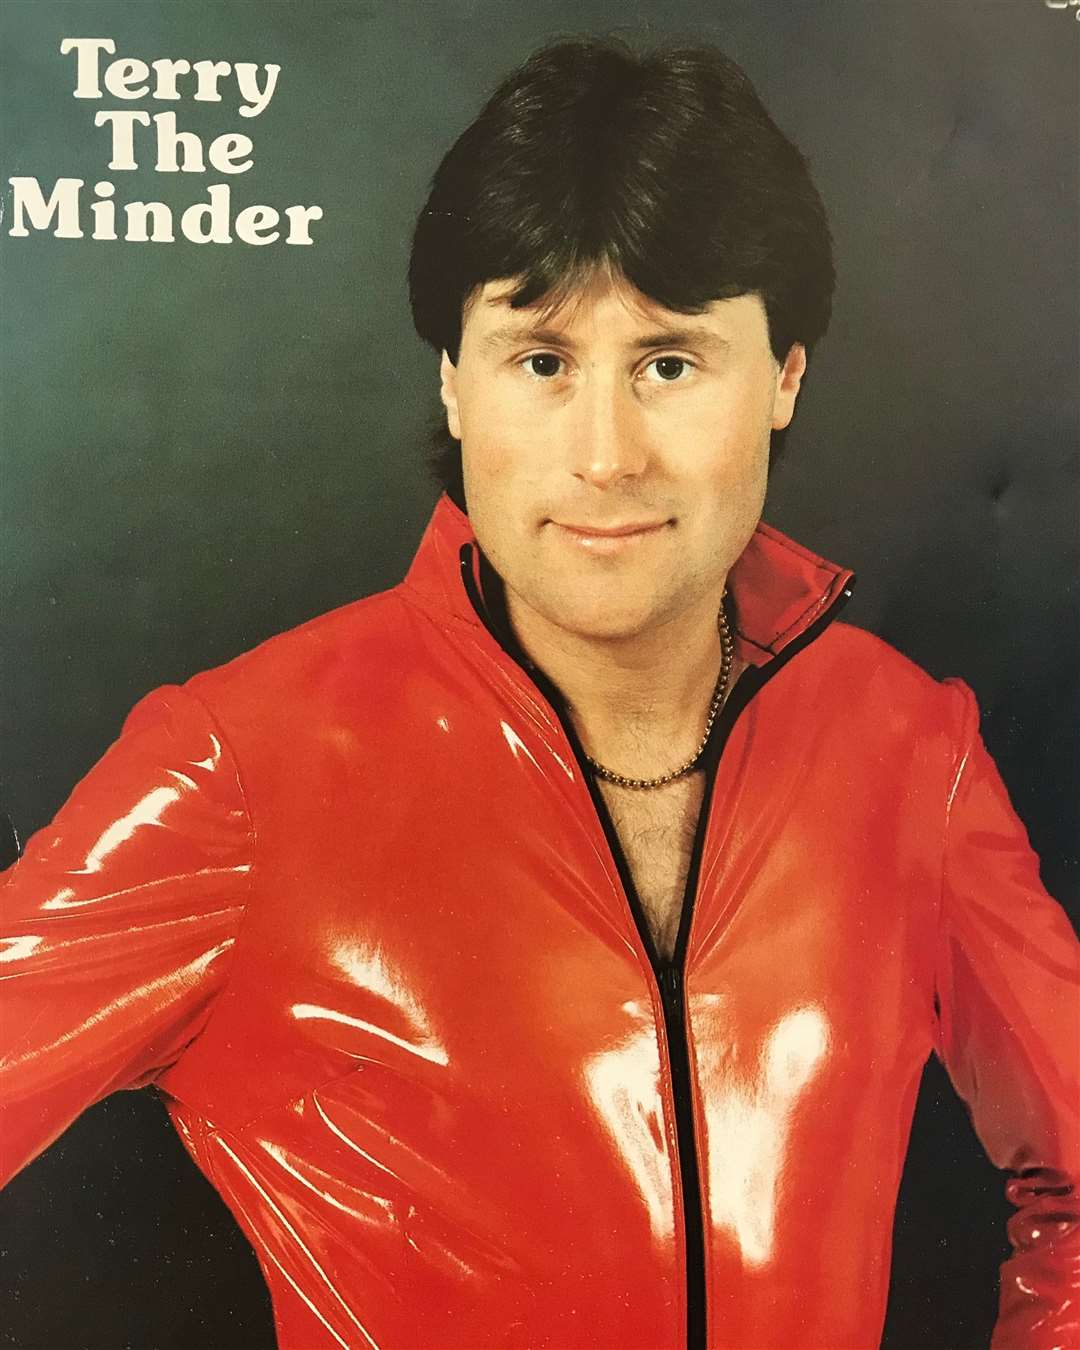 John Worboys's stripper stage name was Terry the Minder